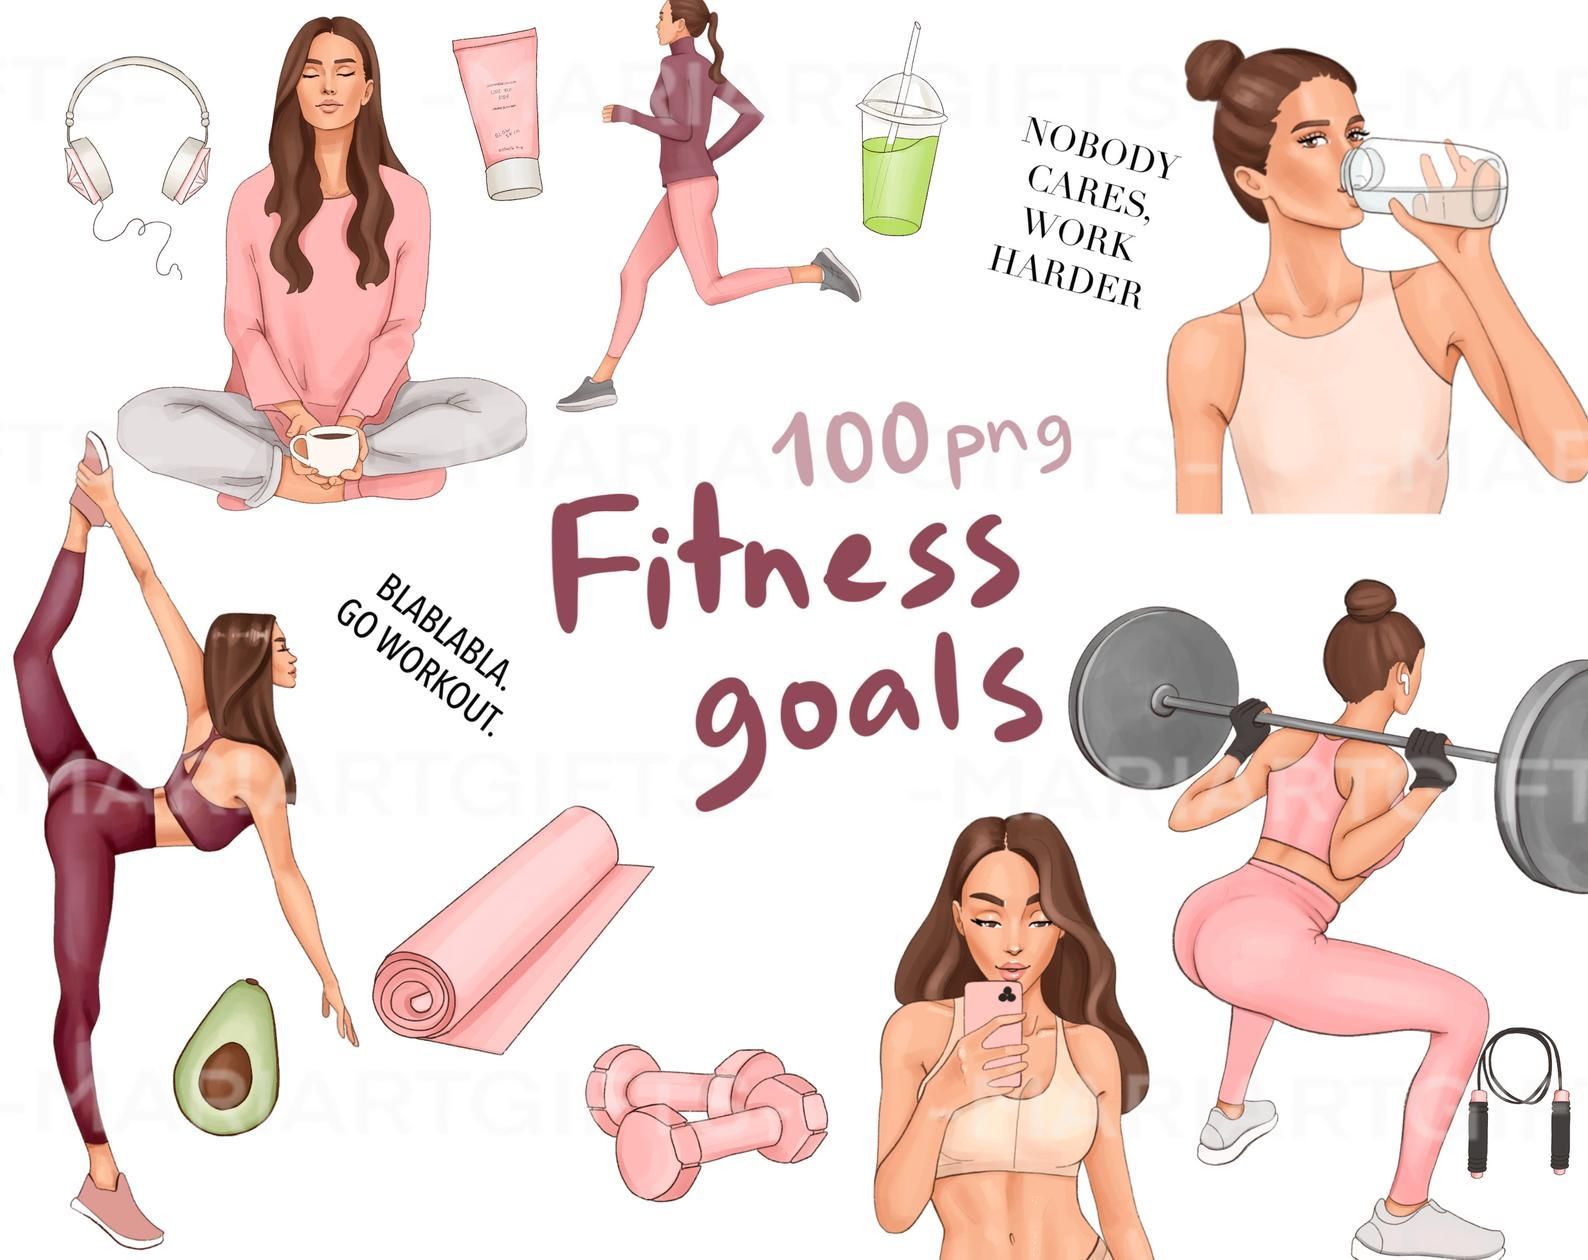 Fitness Clipart, Workout Clip Art, Yoga Clip Art, Fashion Illustration, Gym Equipment, gym clipart, fitness blogger, planner stickers - Fitness Clipart, Workout Clip Art, Yoga Clip Art, Fashion Illustration, Gym Equipment, gym clipart, fitness blogger, planner stickers -   19 fitness Mujer imagenes ideas